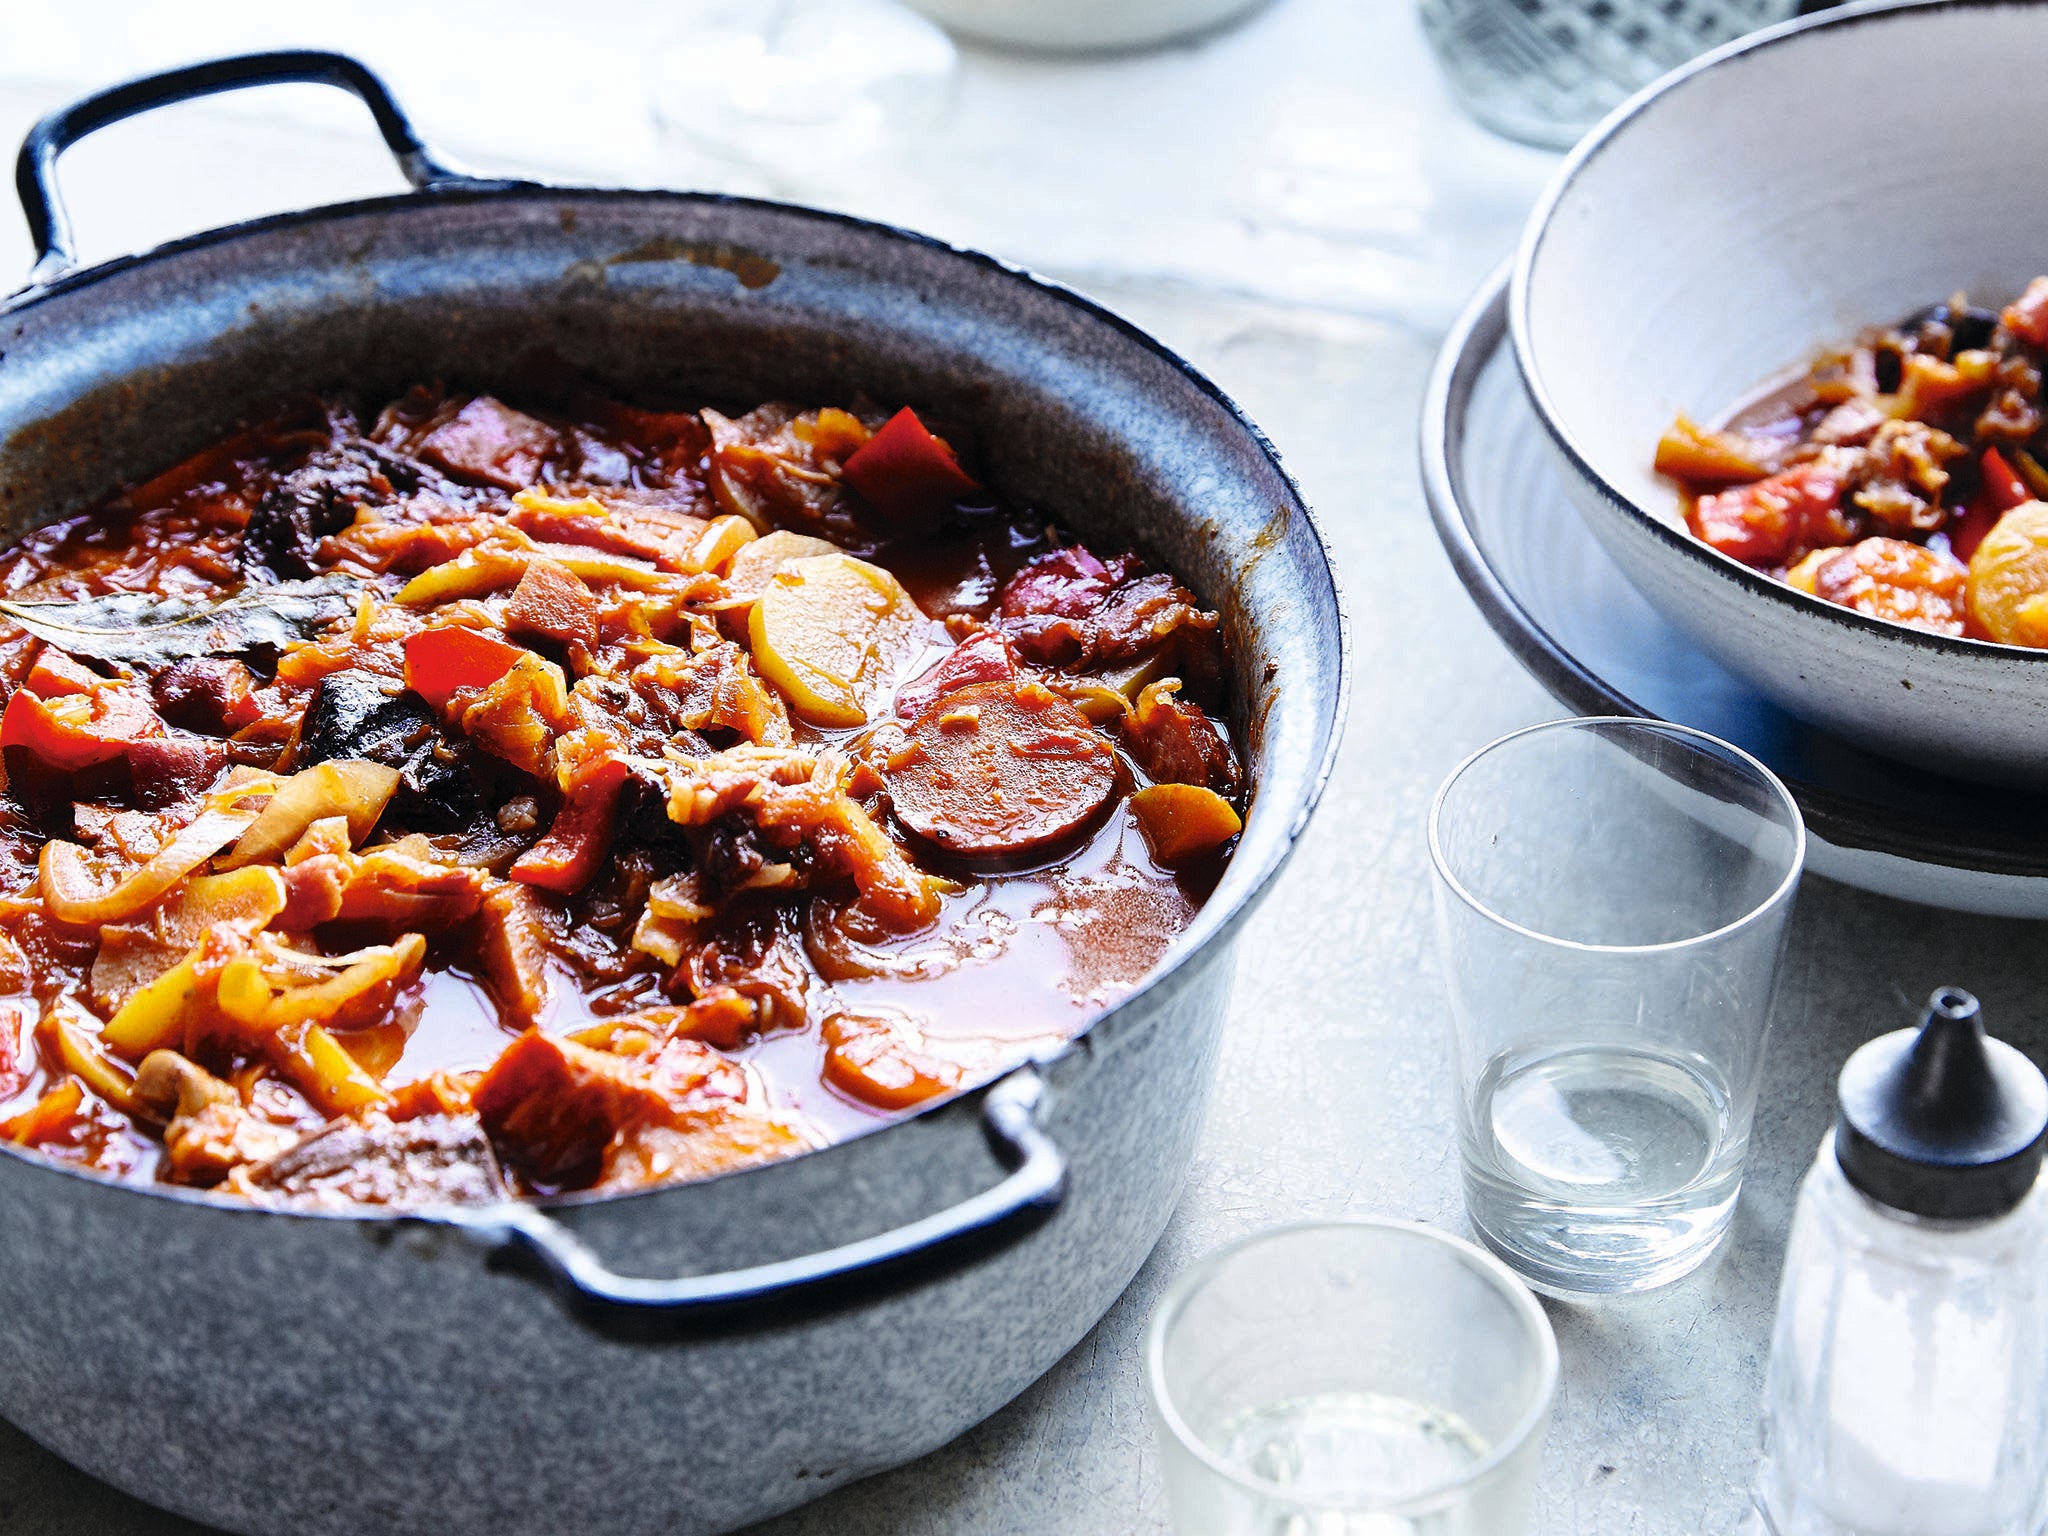 Wth rainbow colours, this Polish stew known as bigos is meaty and full of complex flavours